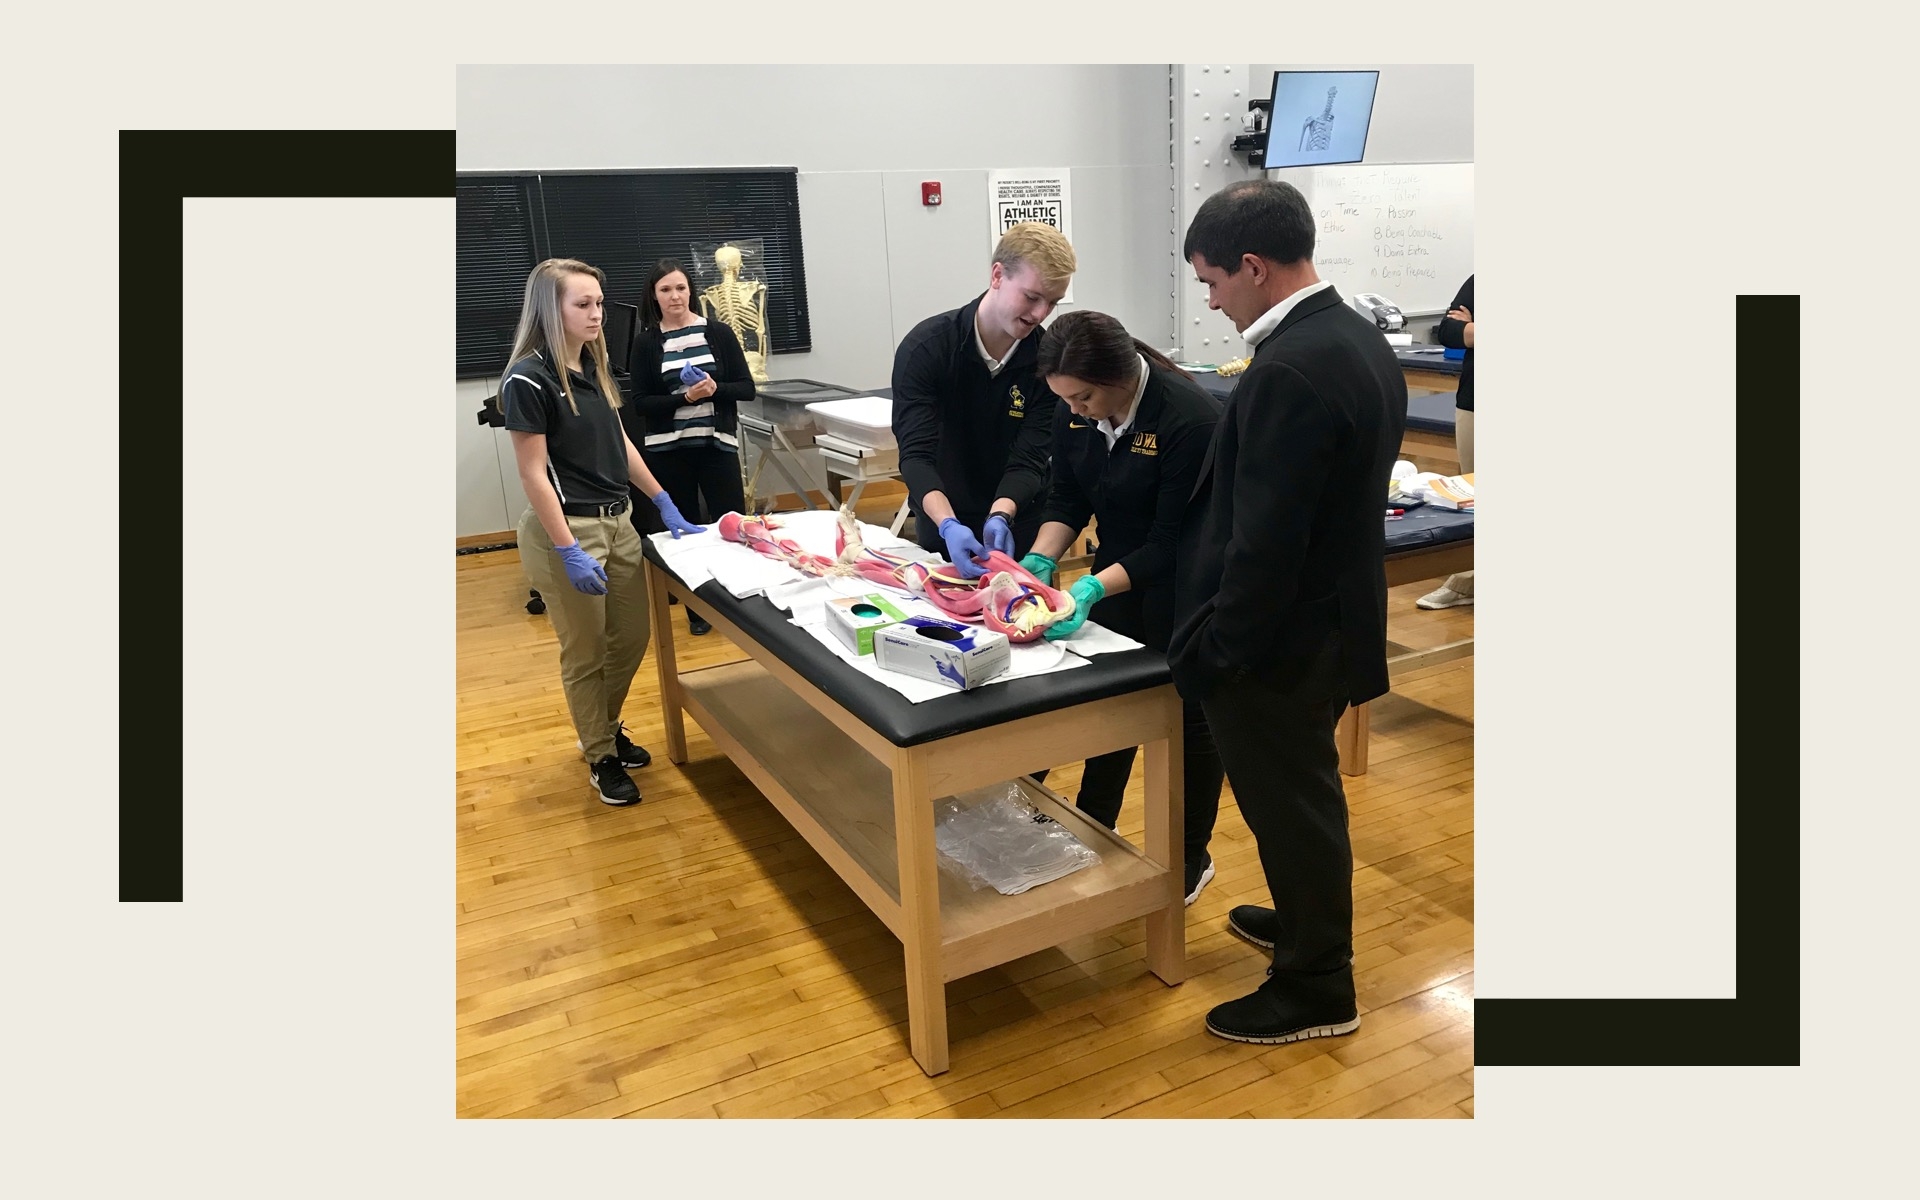 3 students looking at anatomical models in the athletic training lab